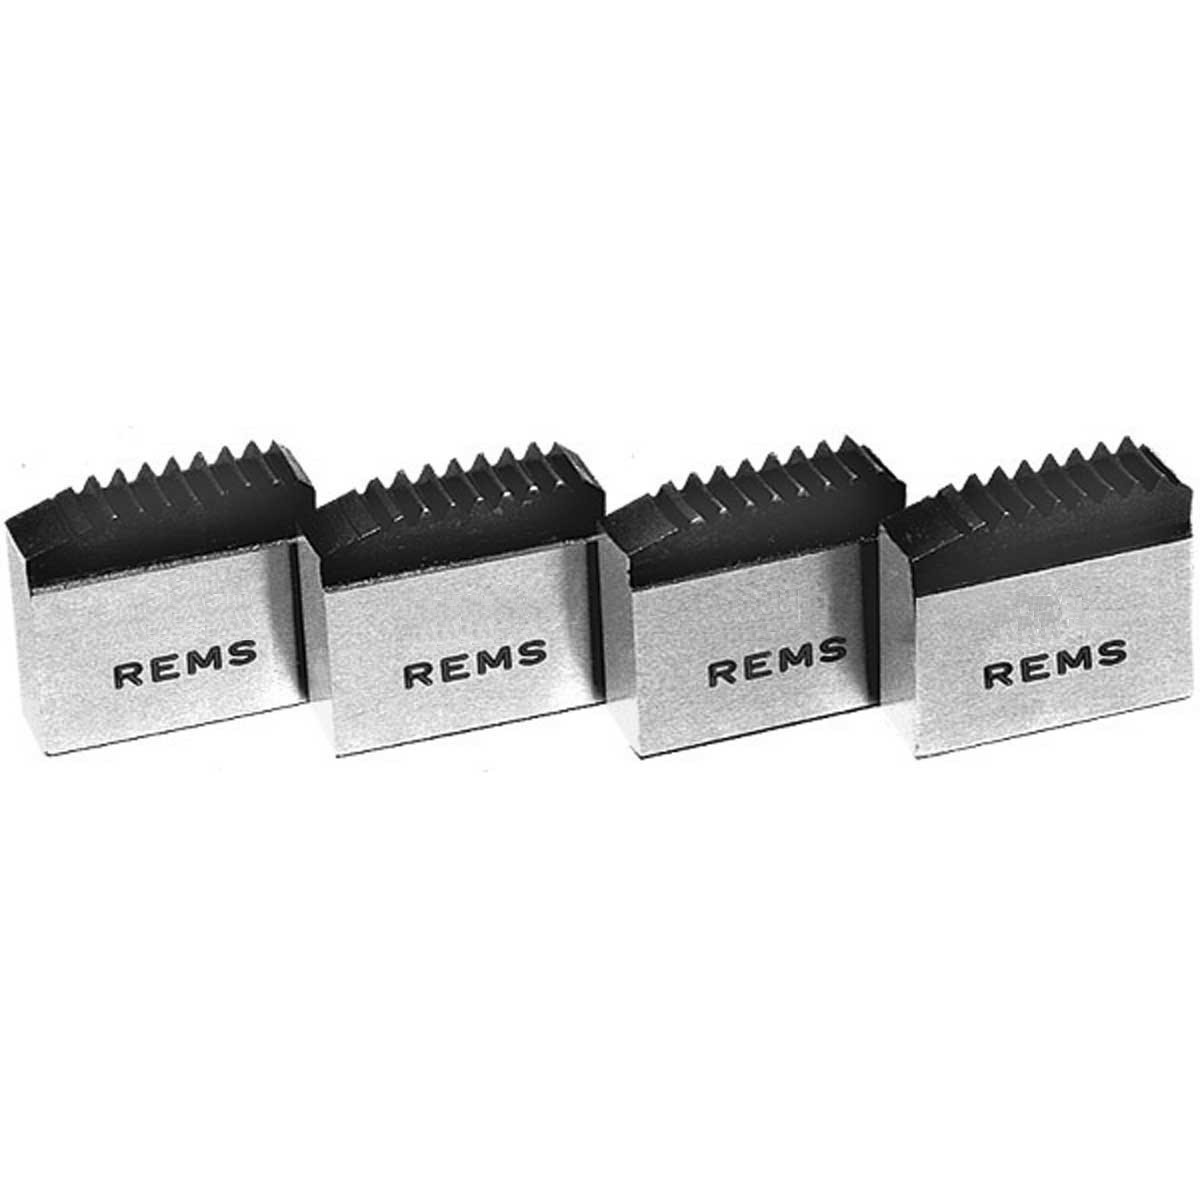 REMS - 1\" Replacement Die Set, 521252